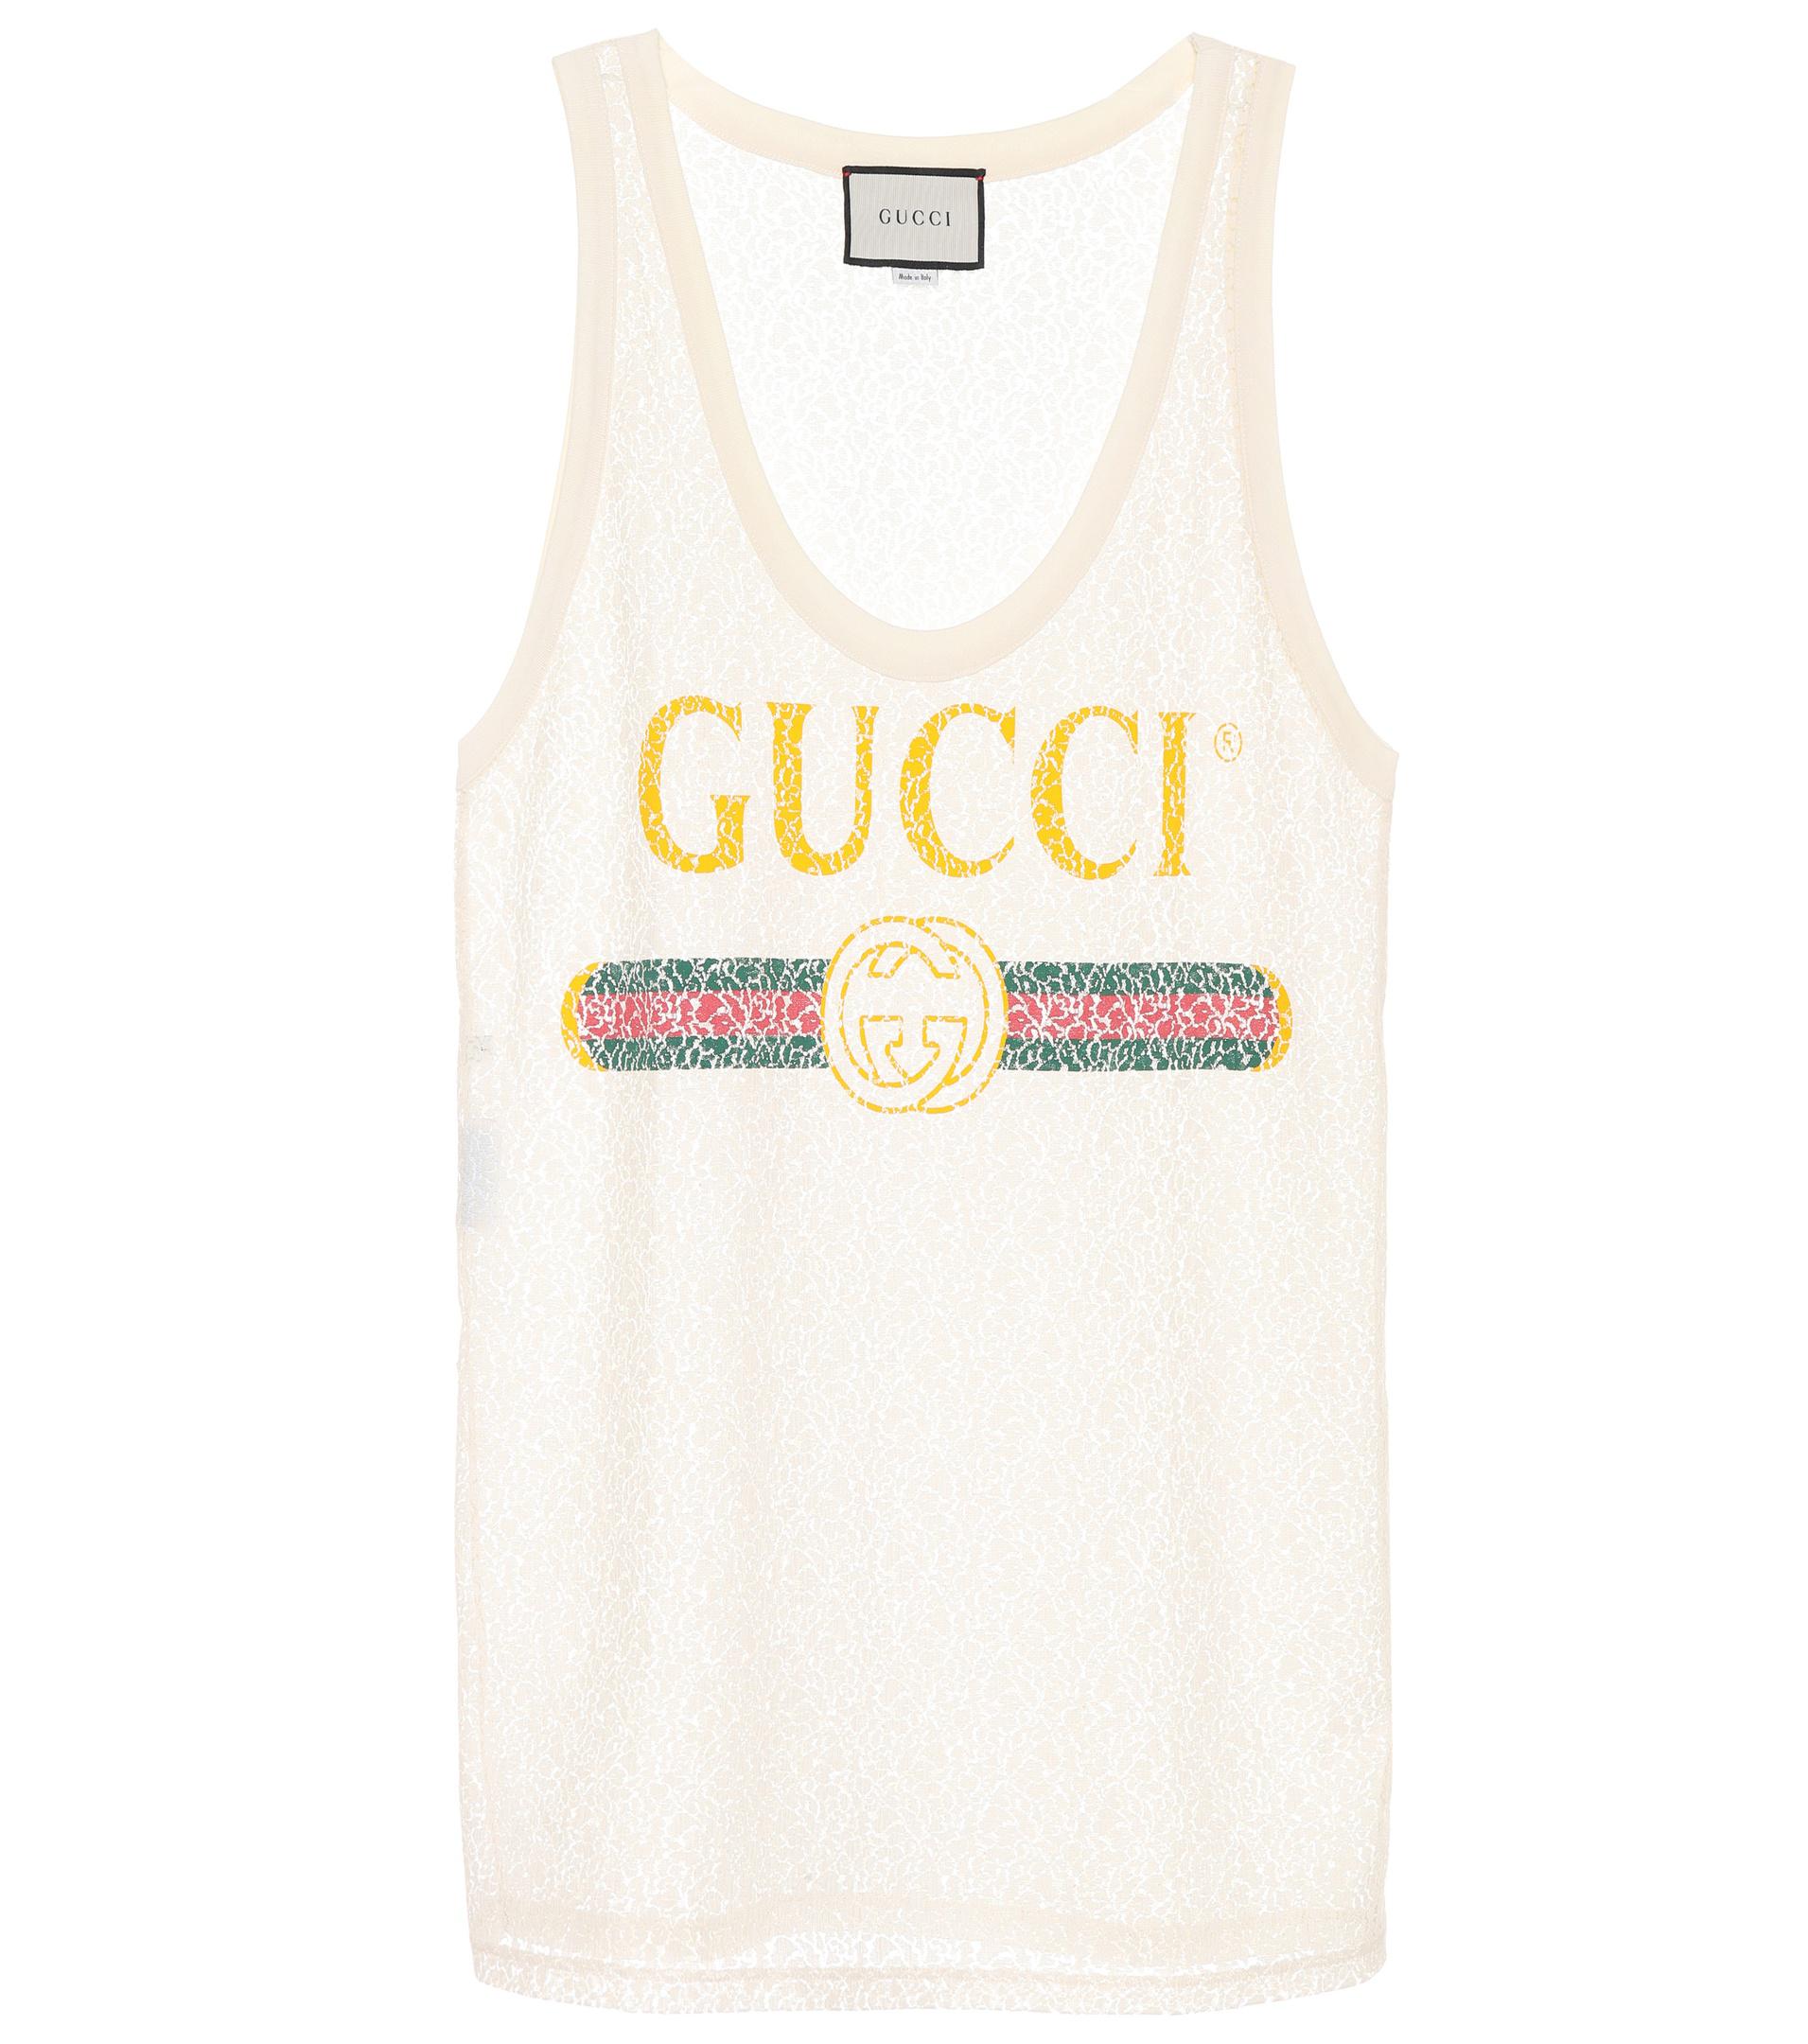 Gucci Printed Lace Tank Top in White | Lyst